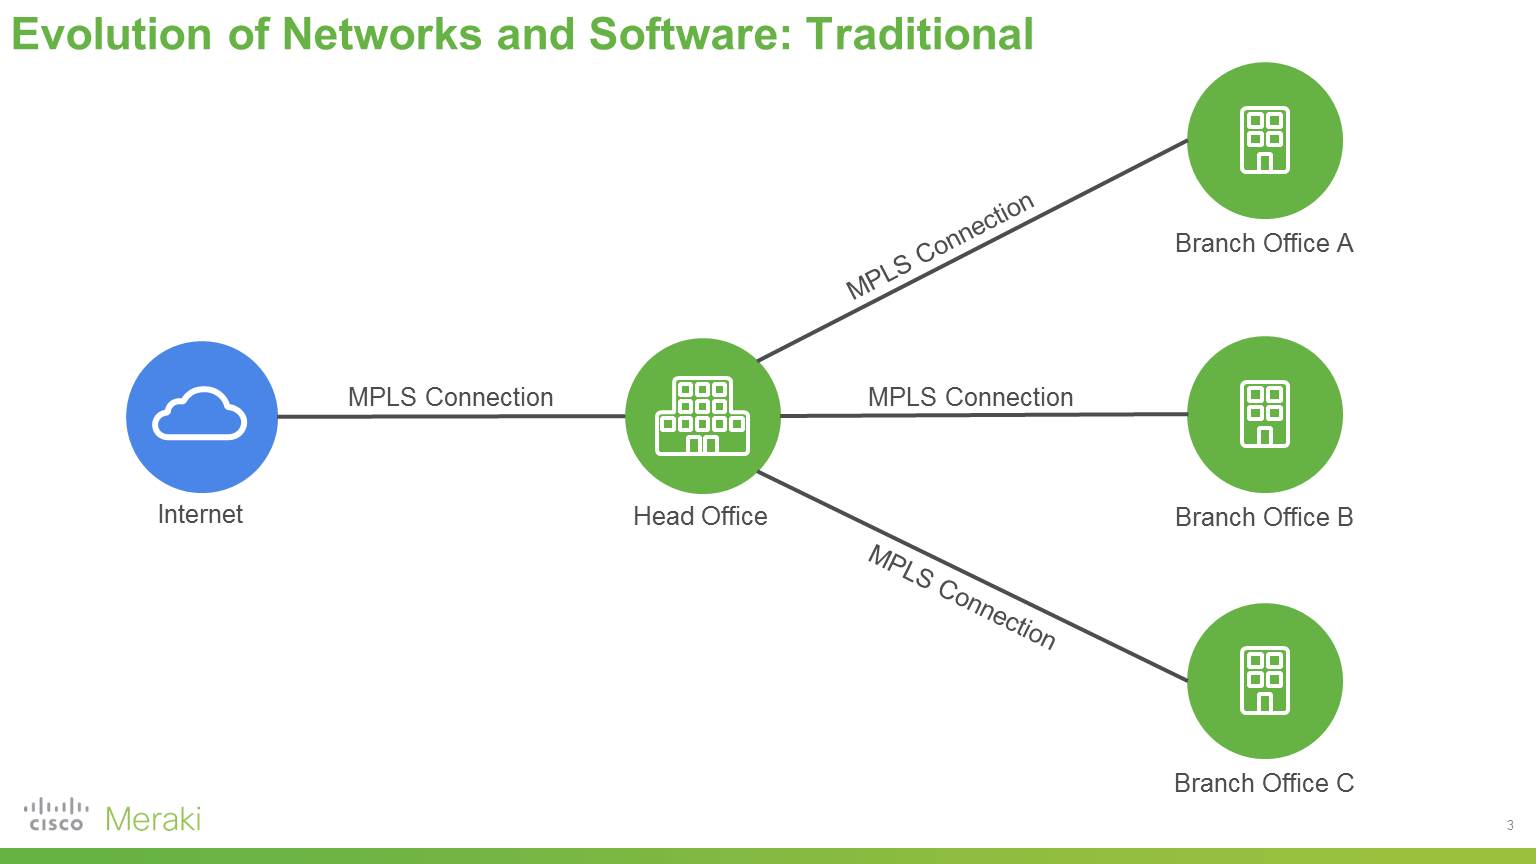 Traditional evolution of networks and software.